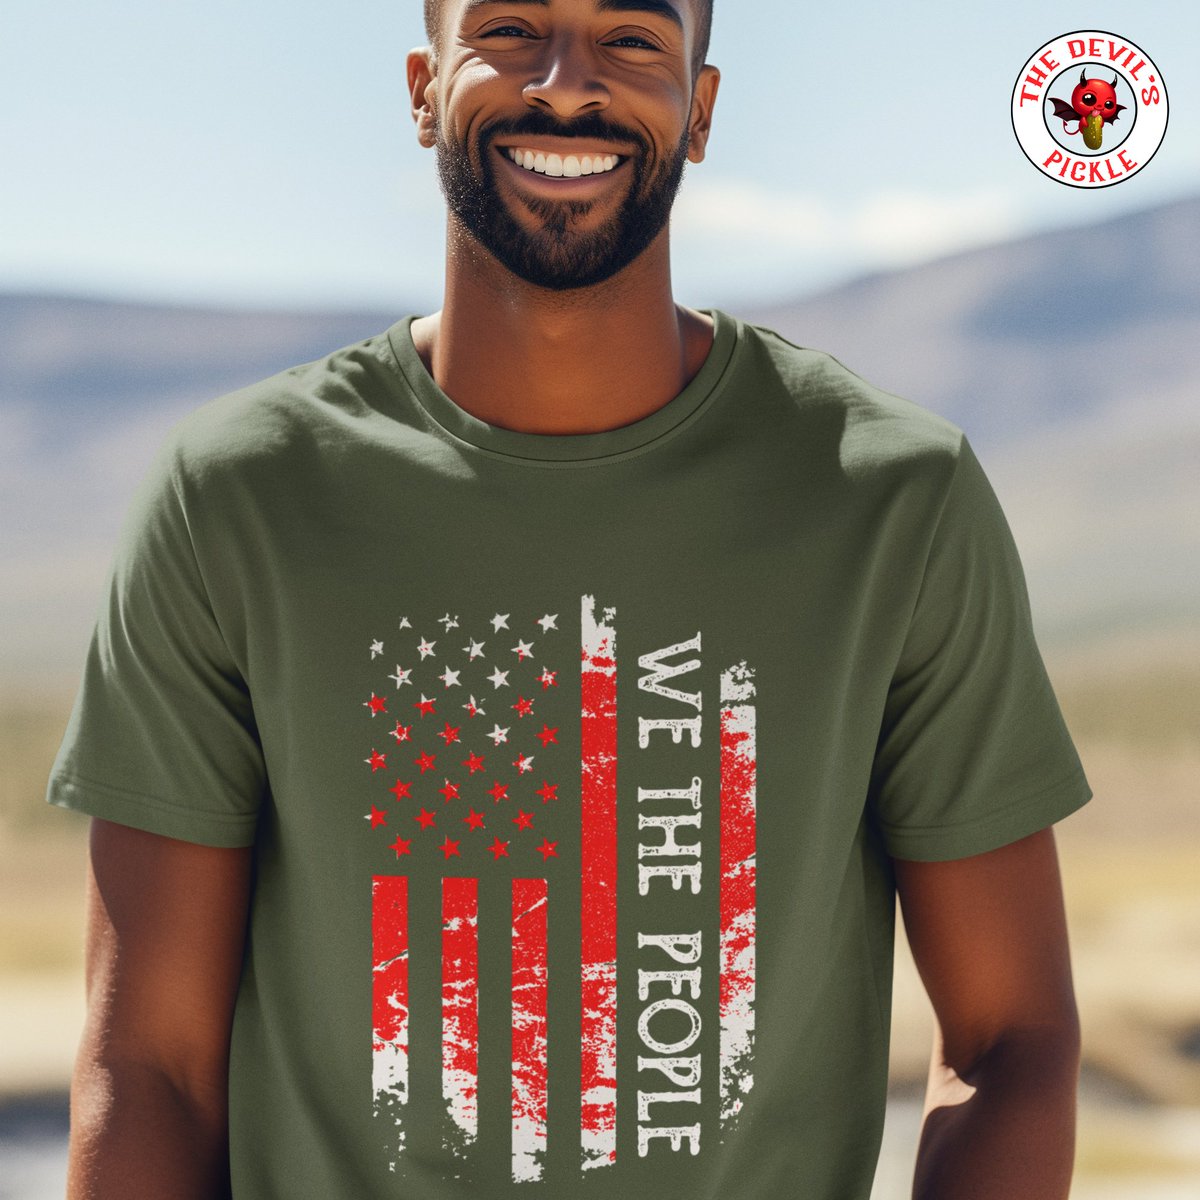 Just here to remind everyone that the power lies in We The People, and also in a killer graphic tee 💪🏼 The Best Patriotic Tees, Hoodies and More at The Devil's Pickle.
 #offensivetshirts #freeshipping #USA  #funnyapparel #ProudAmerican #Freedom #hellyeahamerica #americanpride